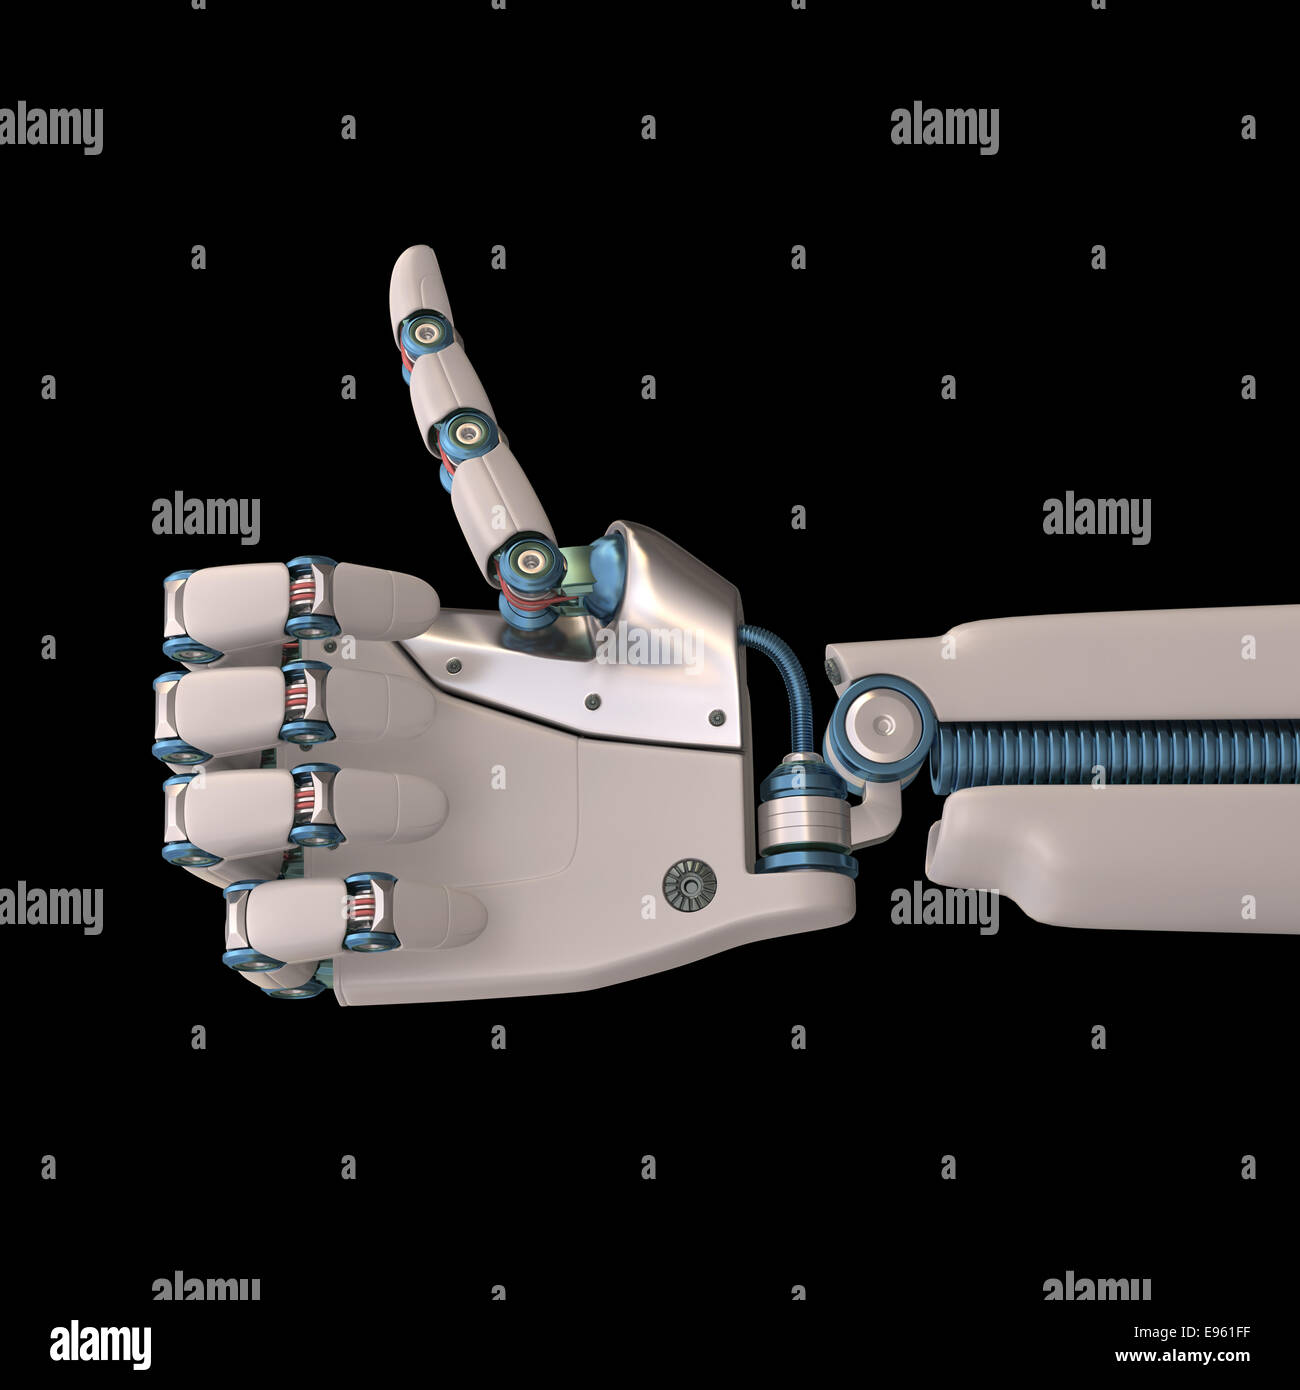 Robotic hand shaped and measures that mimic the human skeleton. Clipping path included. Stock Photo